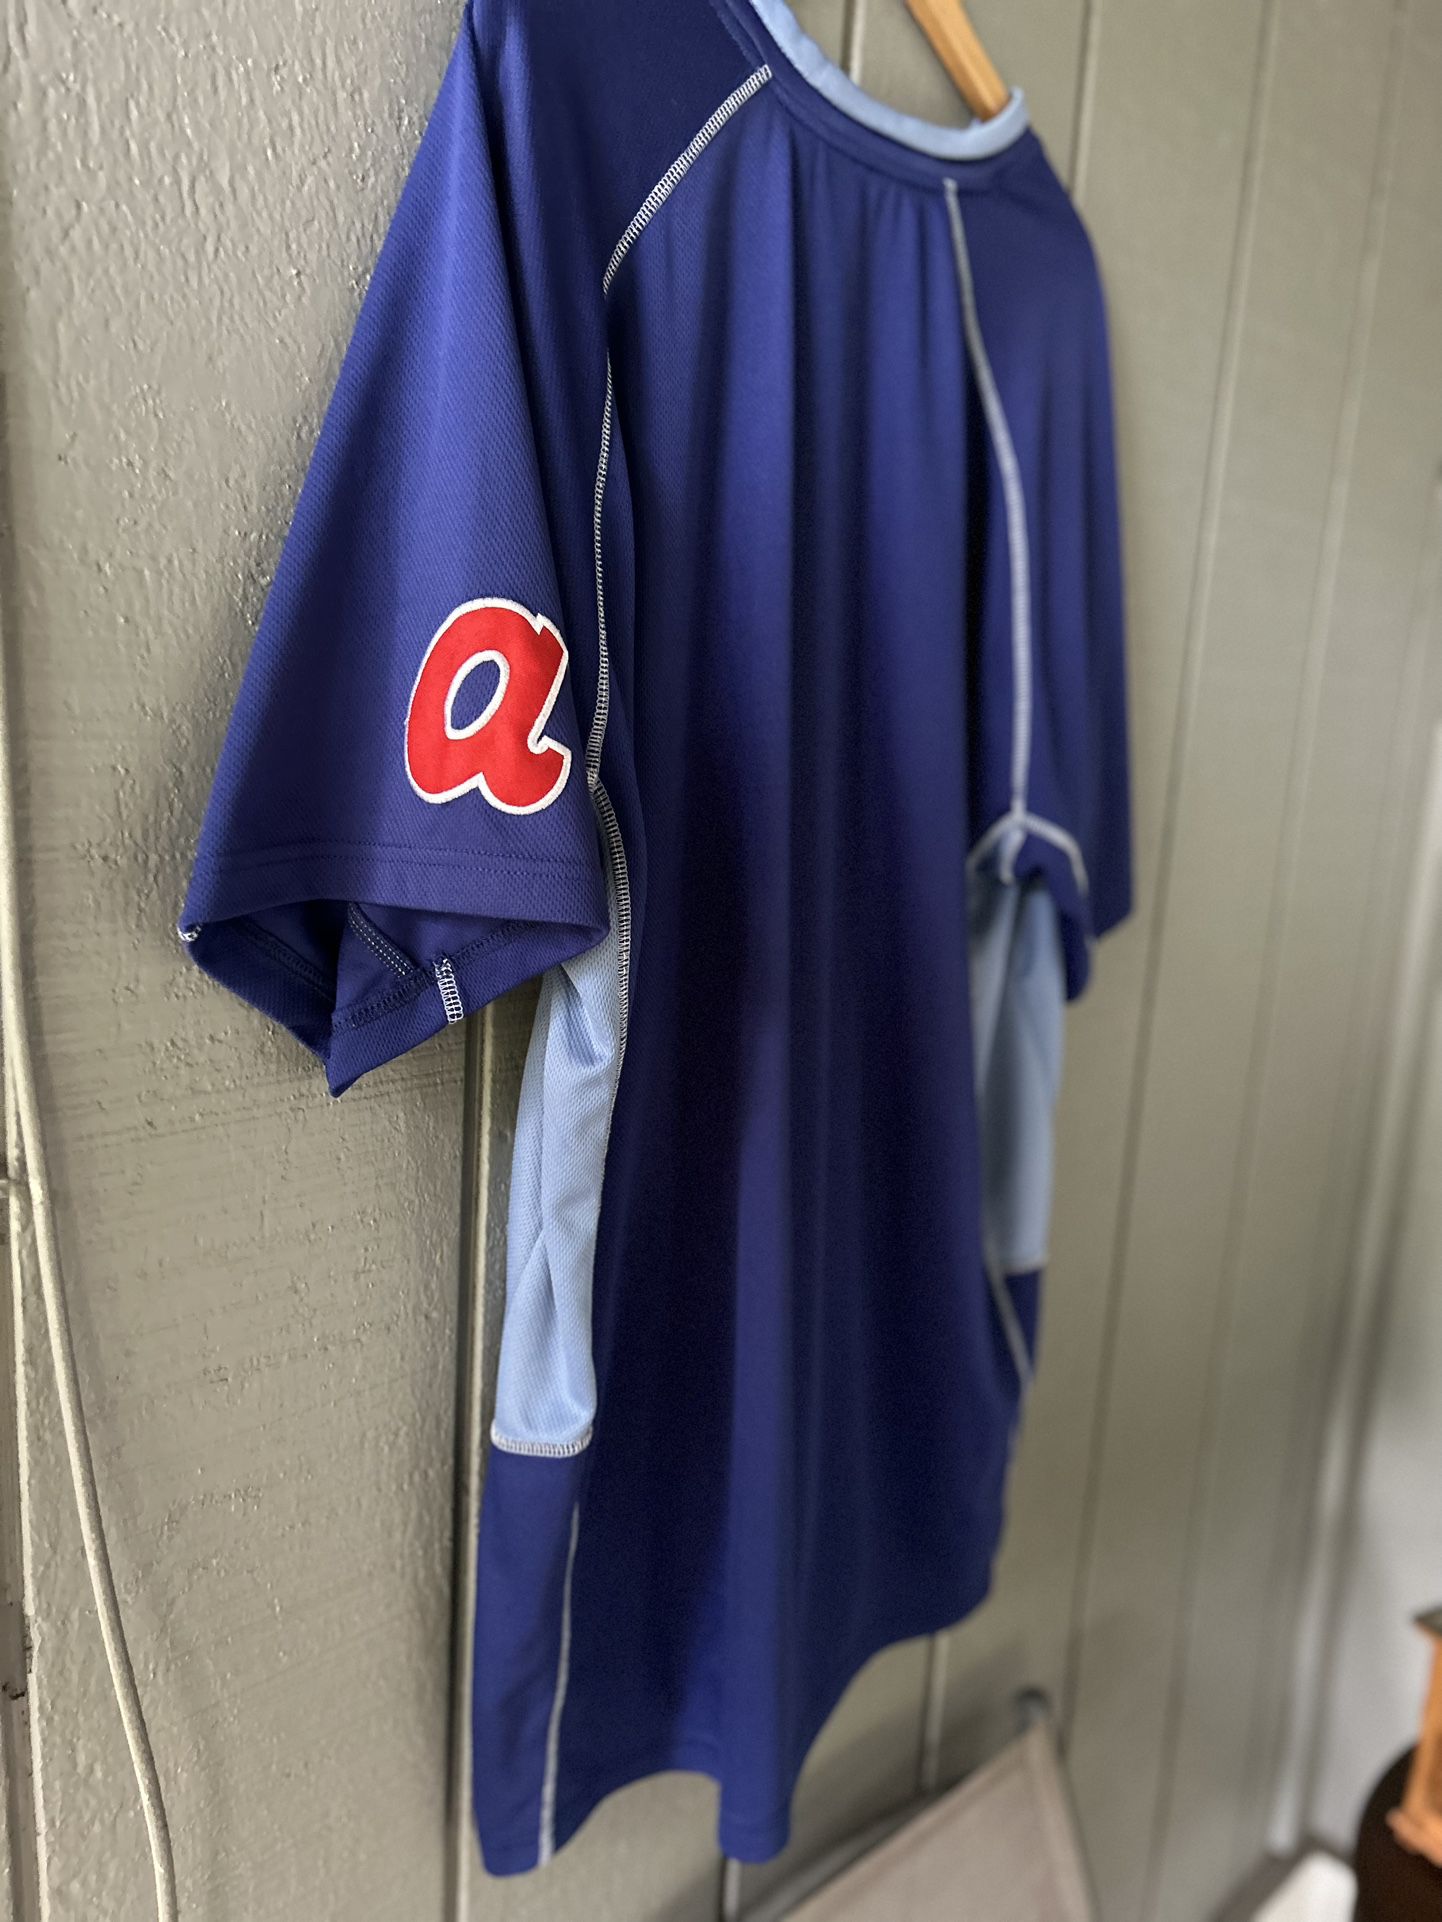 Atlanta Braves Majestic Diamond Collection VTG Authentic Button Up Jersey  XL MLB for Sale in Westmont, IL - OfferUp